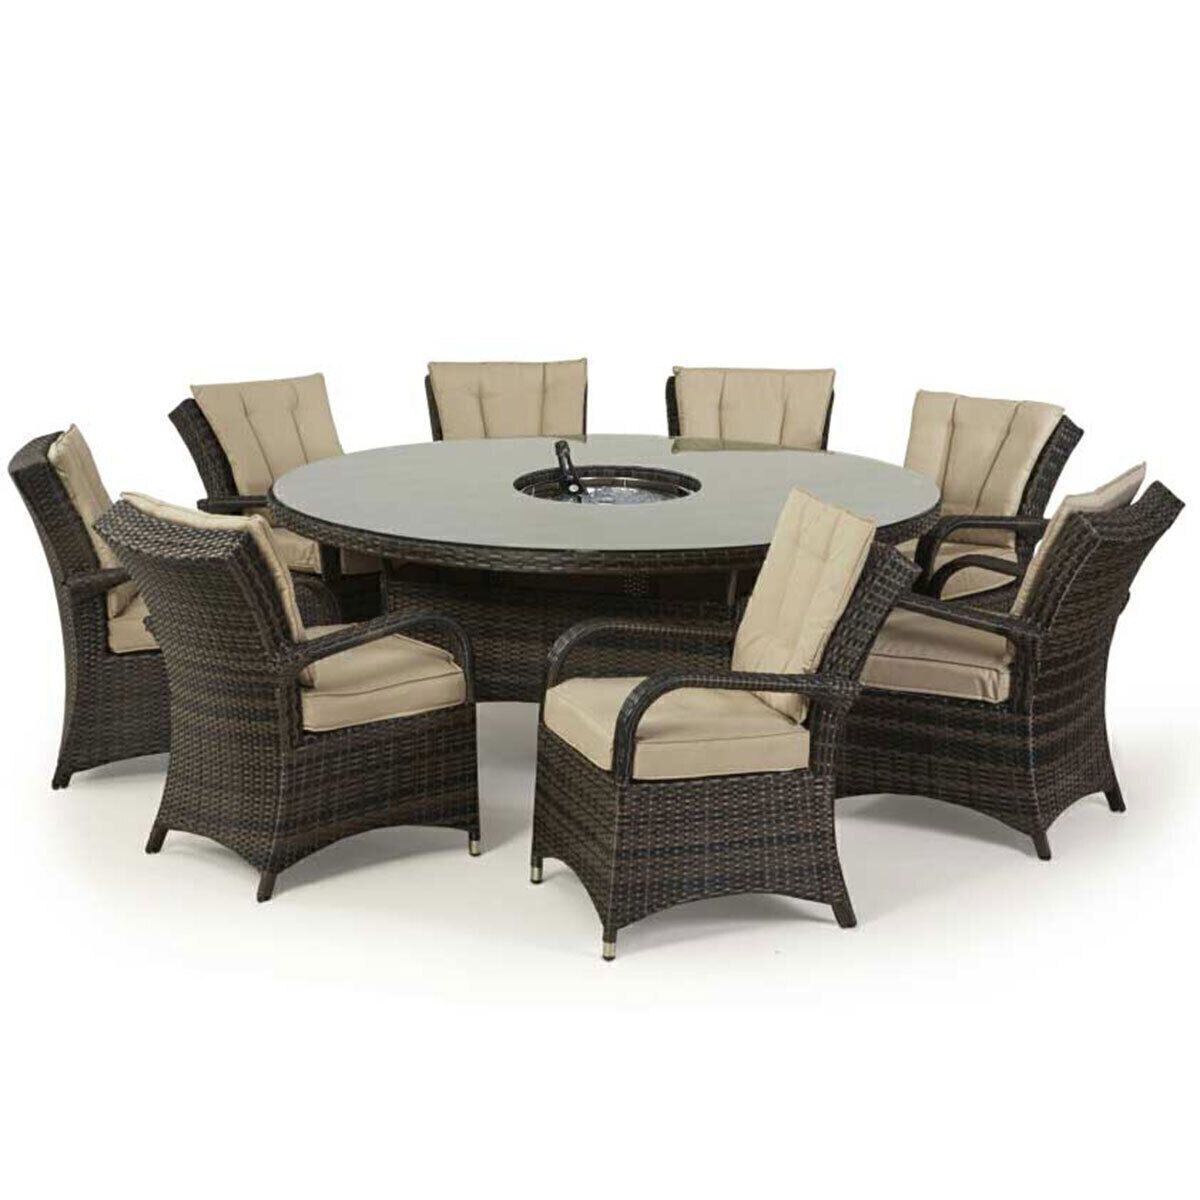 Maze - Texas 8 Seat Round Rattan Dining Set with Ice Bucket & Lazy Susan - Brown product image